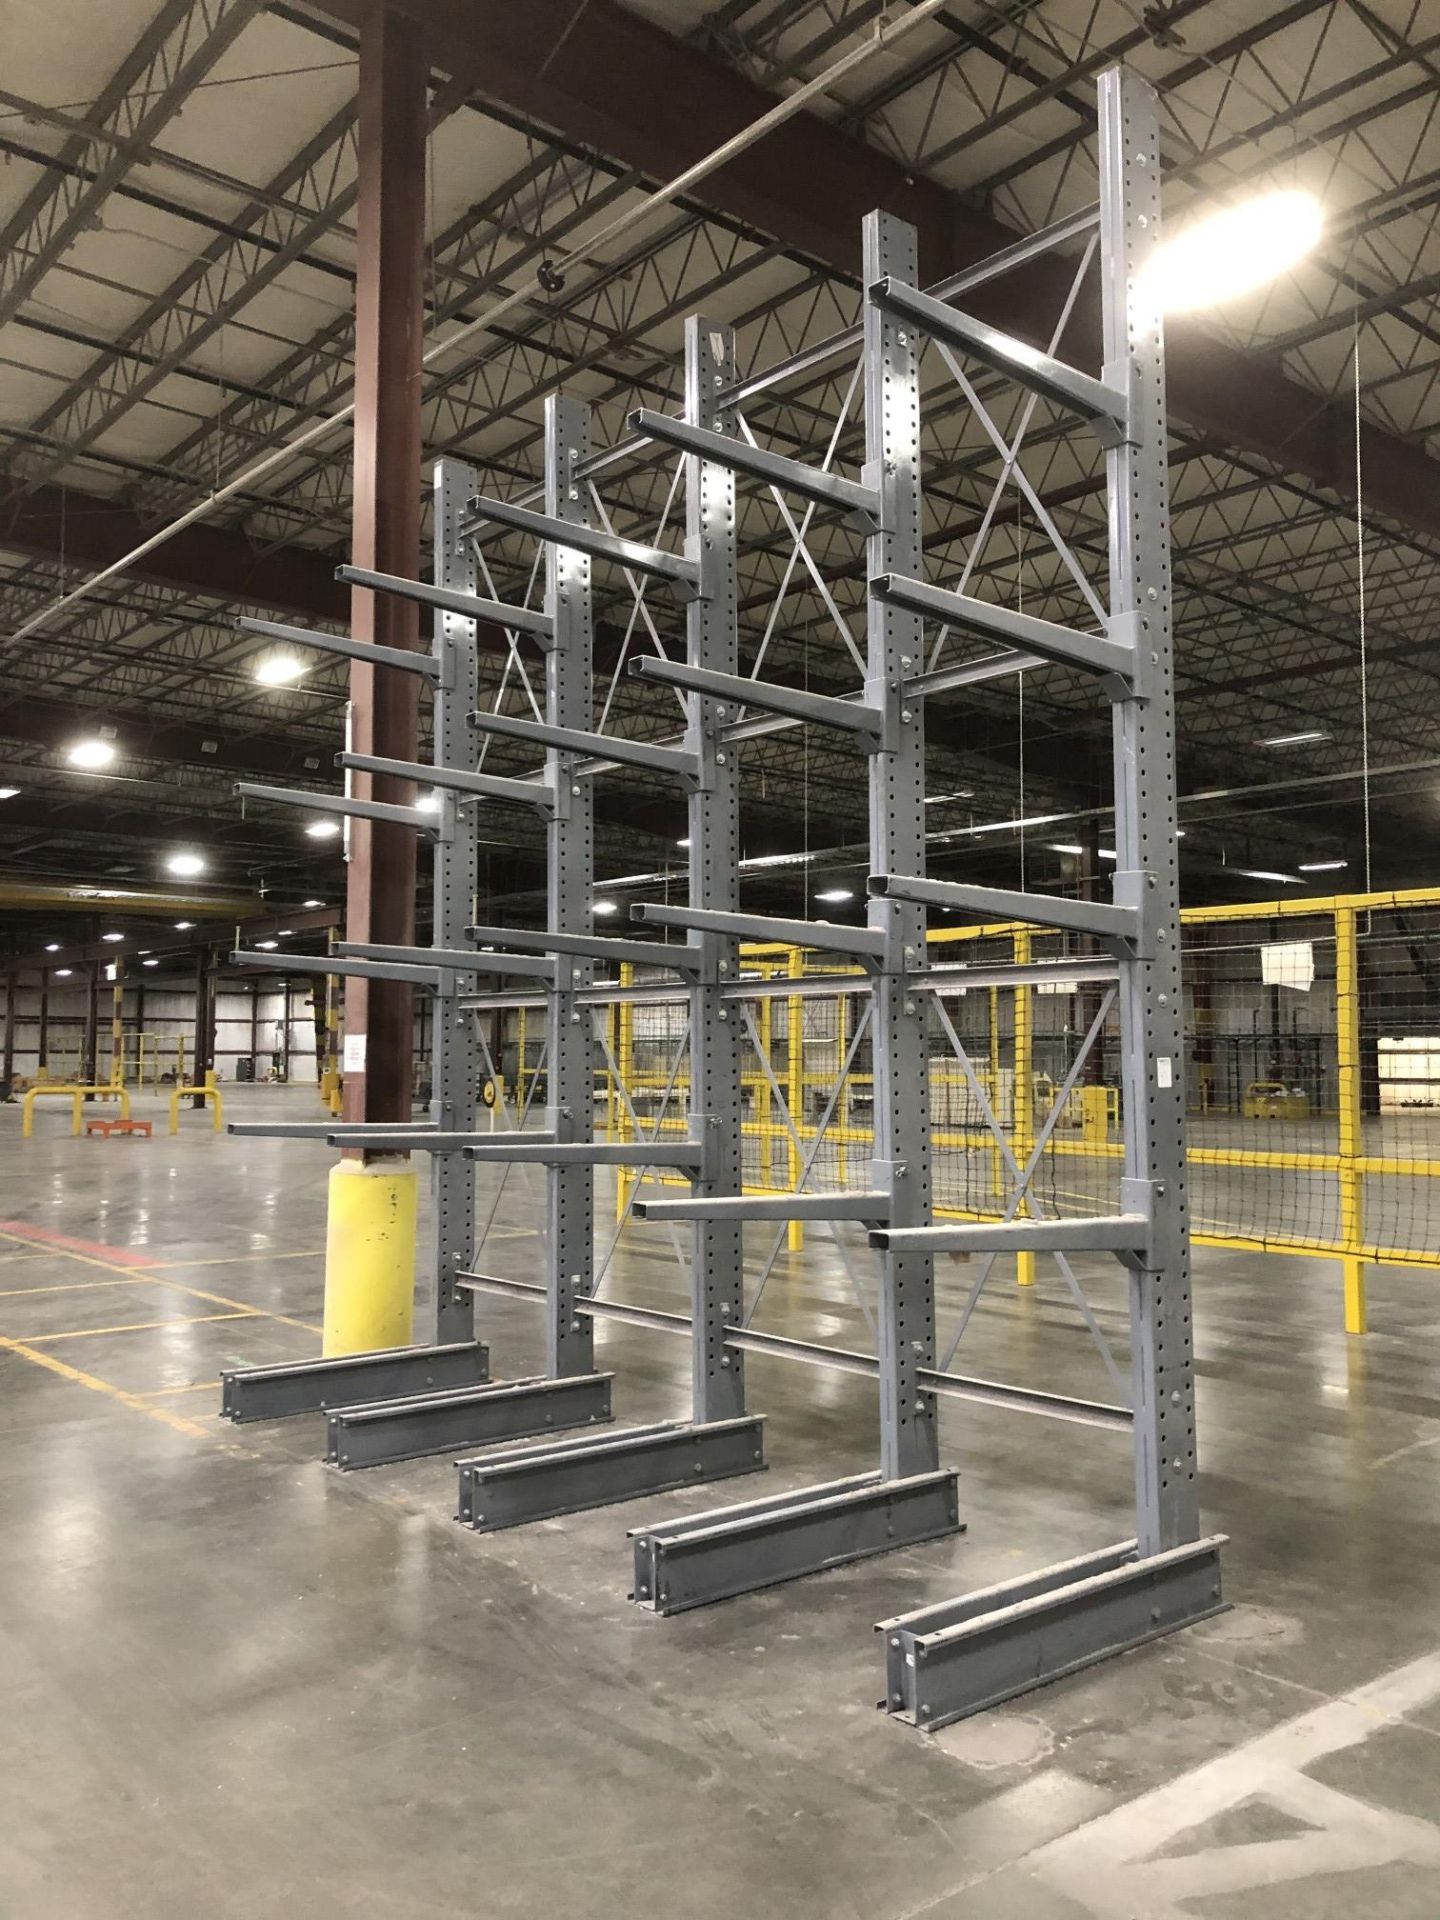 Meco Cantilever Rack (18' High x Approx. 16' Wide x 4' Arms)